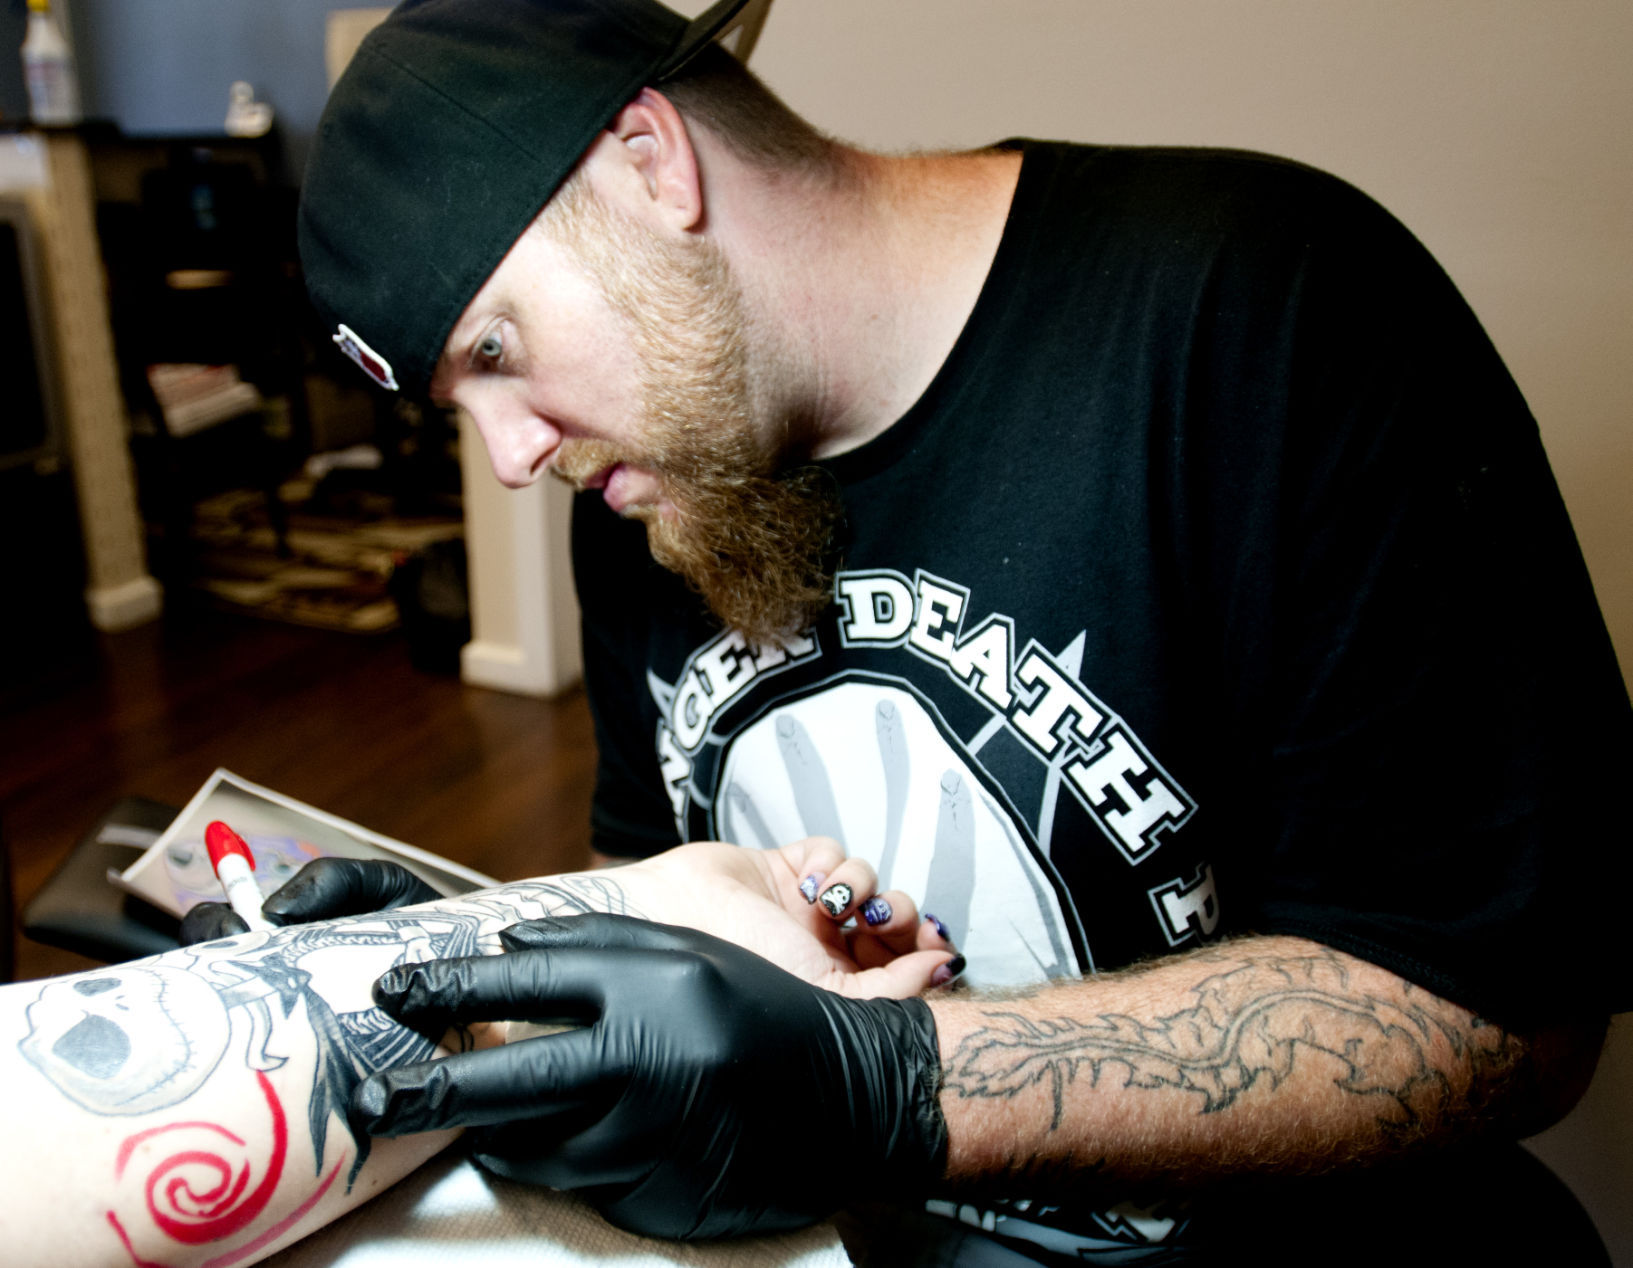 Best Tattoo Artists From All Over the World